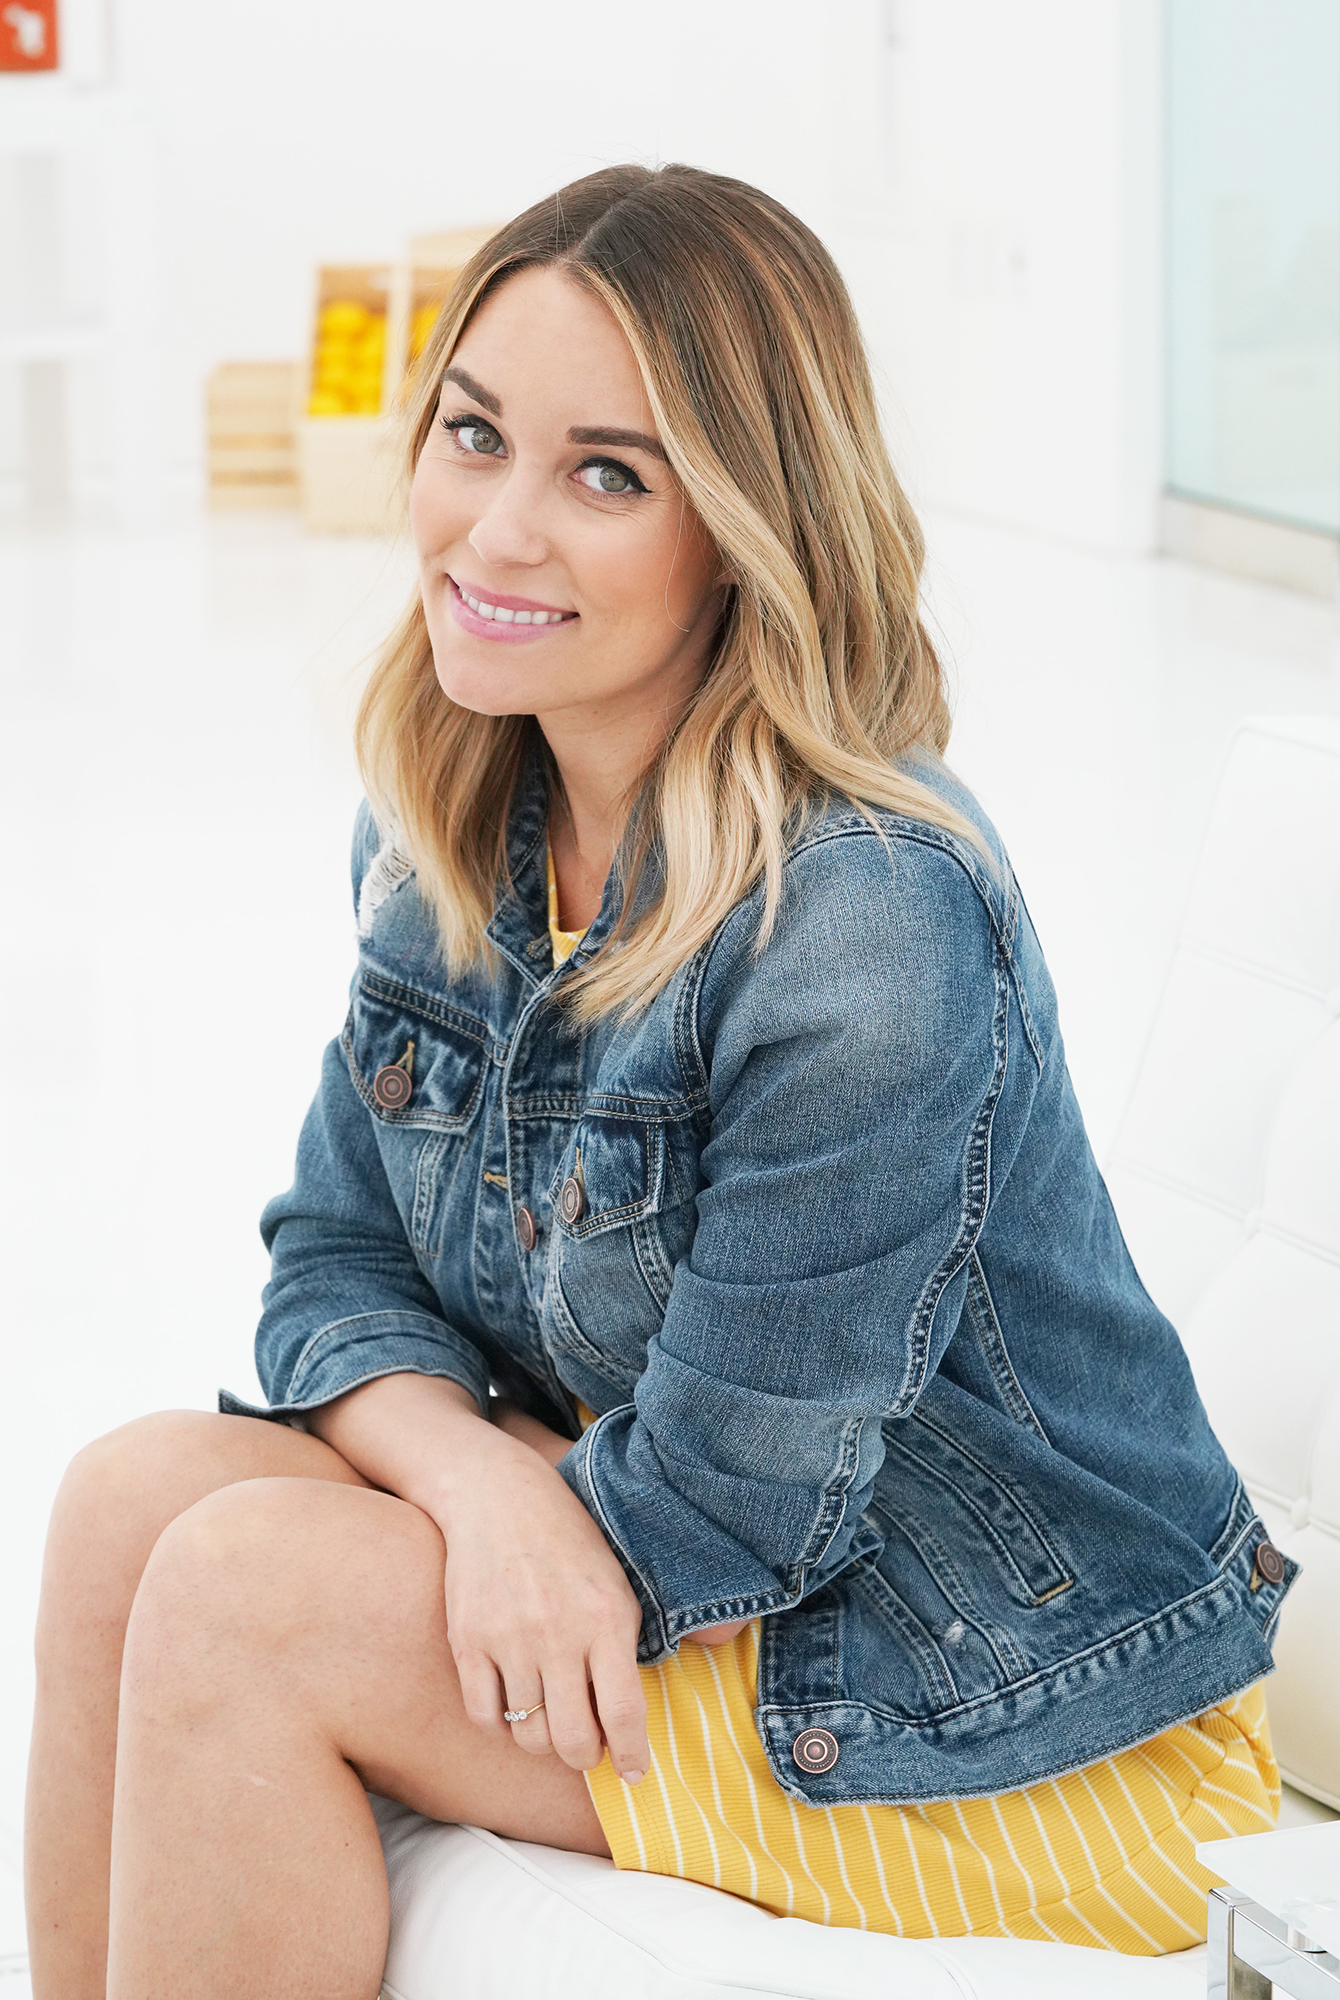 Lauren Conrad Admits Her 'Life Is a Bit of a Mess' After Becoming a Mom